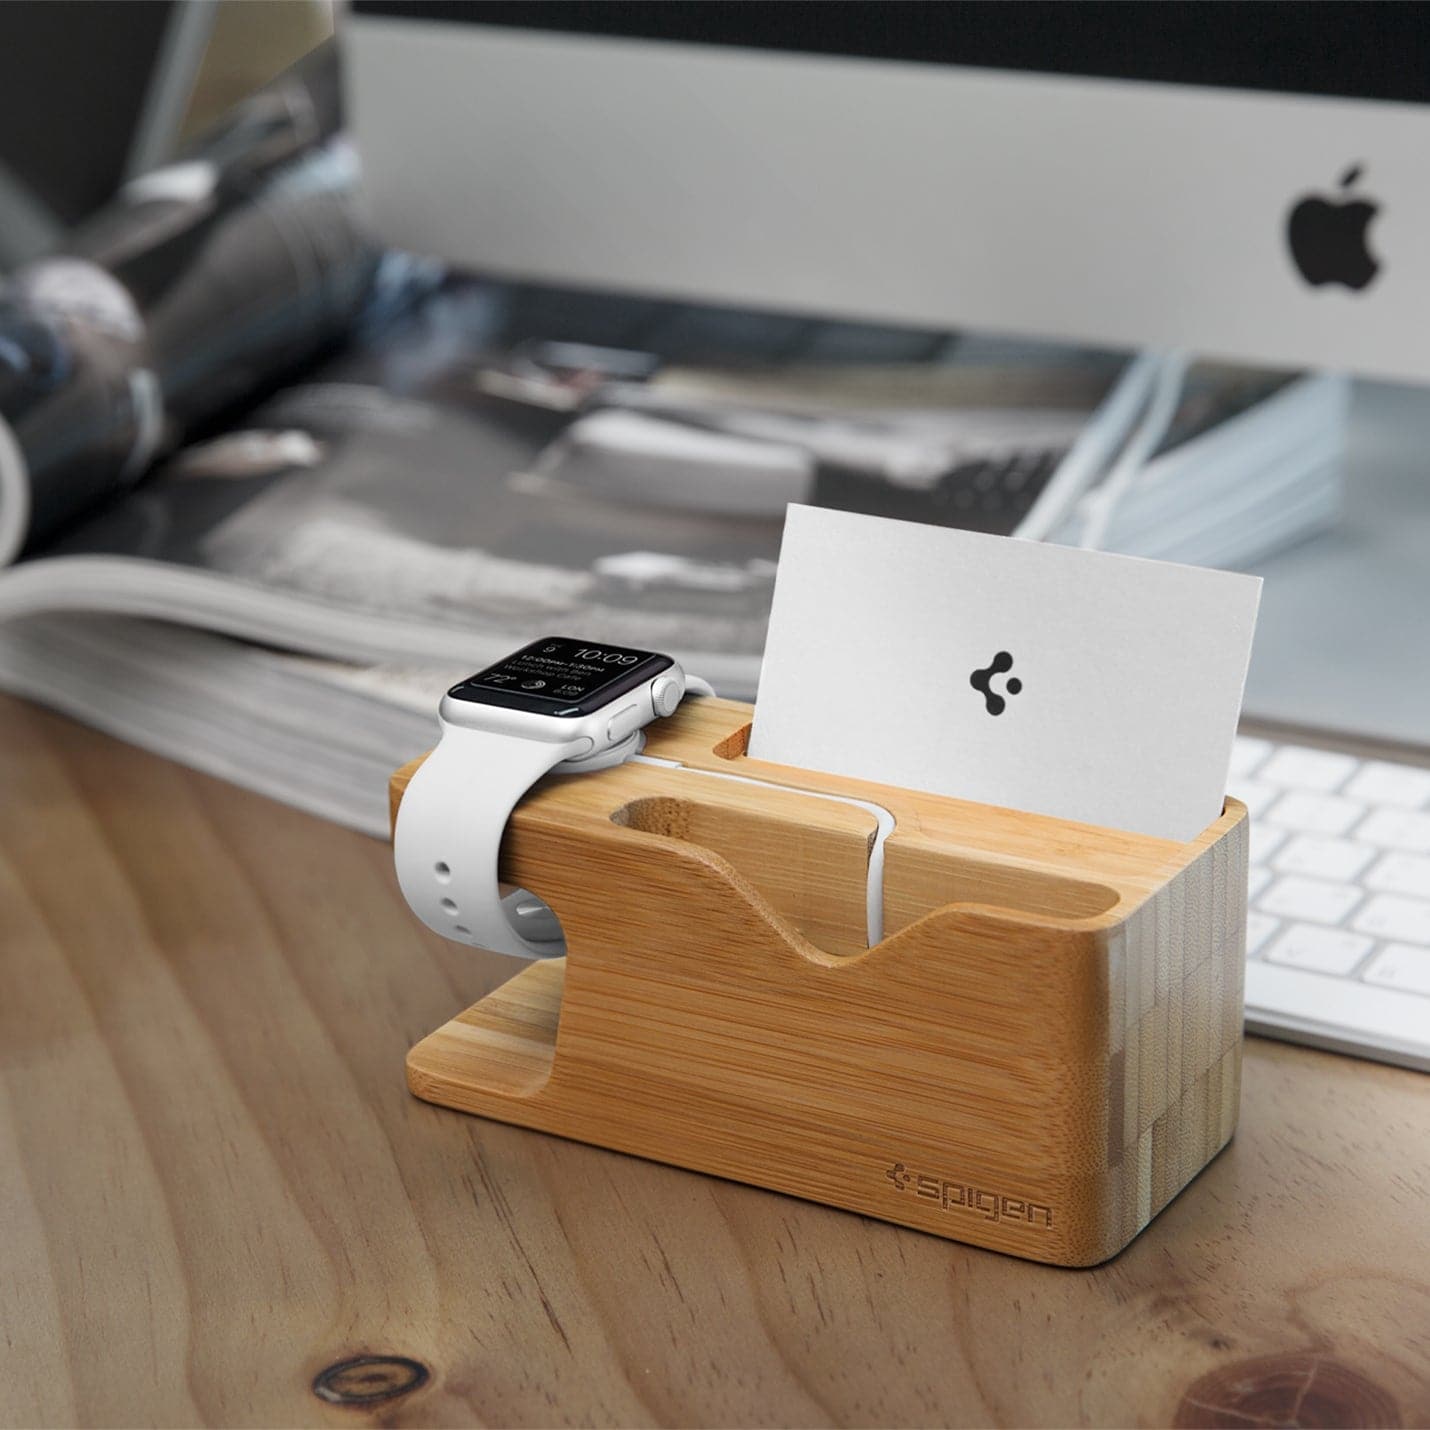 000ST20295 - Apple Watch + Phone Stand S370 showing the front and side with business card and watch on stand on top of a desk